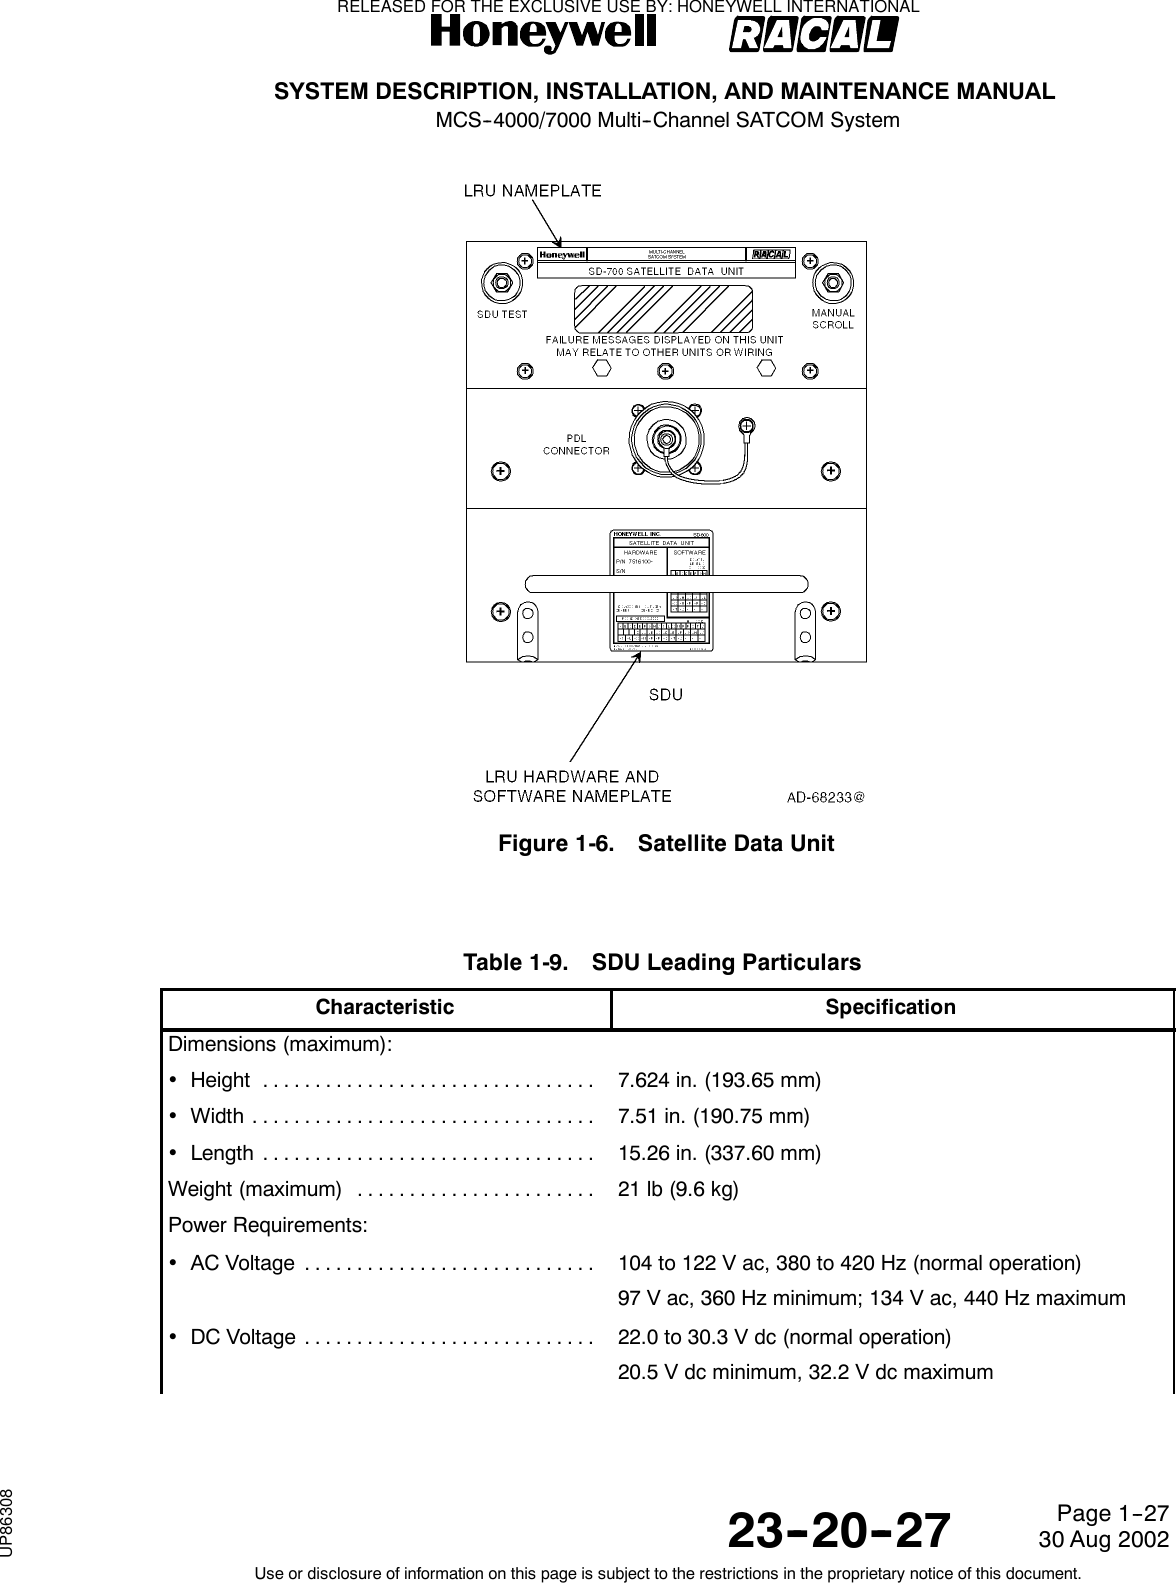 SYSTEM DESCRIPTION, INSTALLATION, AND MAINTENANCE MANUALMCS--4000/7000 Multi--Channel SATCOM System23--20--2730 Aug 2002Use or disclosure of information on this page is subject to the restrictions in the proprietary notice of this document.Page 1--27Figure 1-6. Satellite Data UnitTable 1-9. SDU Leading ParticularsCharacteristic SpecificationDimensions (maximum):•Height ................................ 7.624 in. (193.65 mm)•Width ................................. 7.51 in. (190.75 mm)•Length ................................ 15.26 in. (337.60 mm)Weight (maximum) ....................... 21 lb (9.6 kg)Power Requirements:•ACVoltage ............................ 104 to 122 V ac, 380 to 420 Hz (normal operation)97 V ac, 360 Hz minimum; 134 V ac, 440 Hz maximum•DCVoltage ............................ 22.0 to 30.3 V dc (normal operation)20.5 V dc minimum, 32.2 V dc maximumRELEASED FOR THE EXCLUSIVE USE BY: HONEYWELL INTERNATIONALUP86308